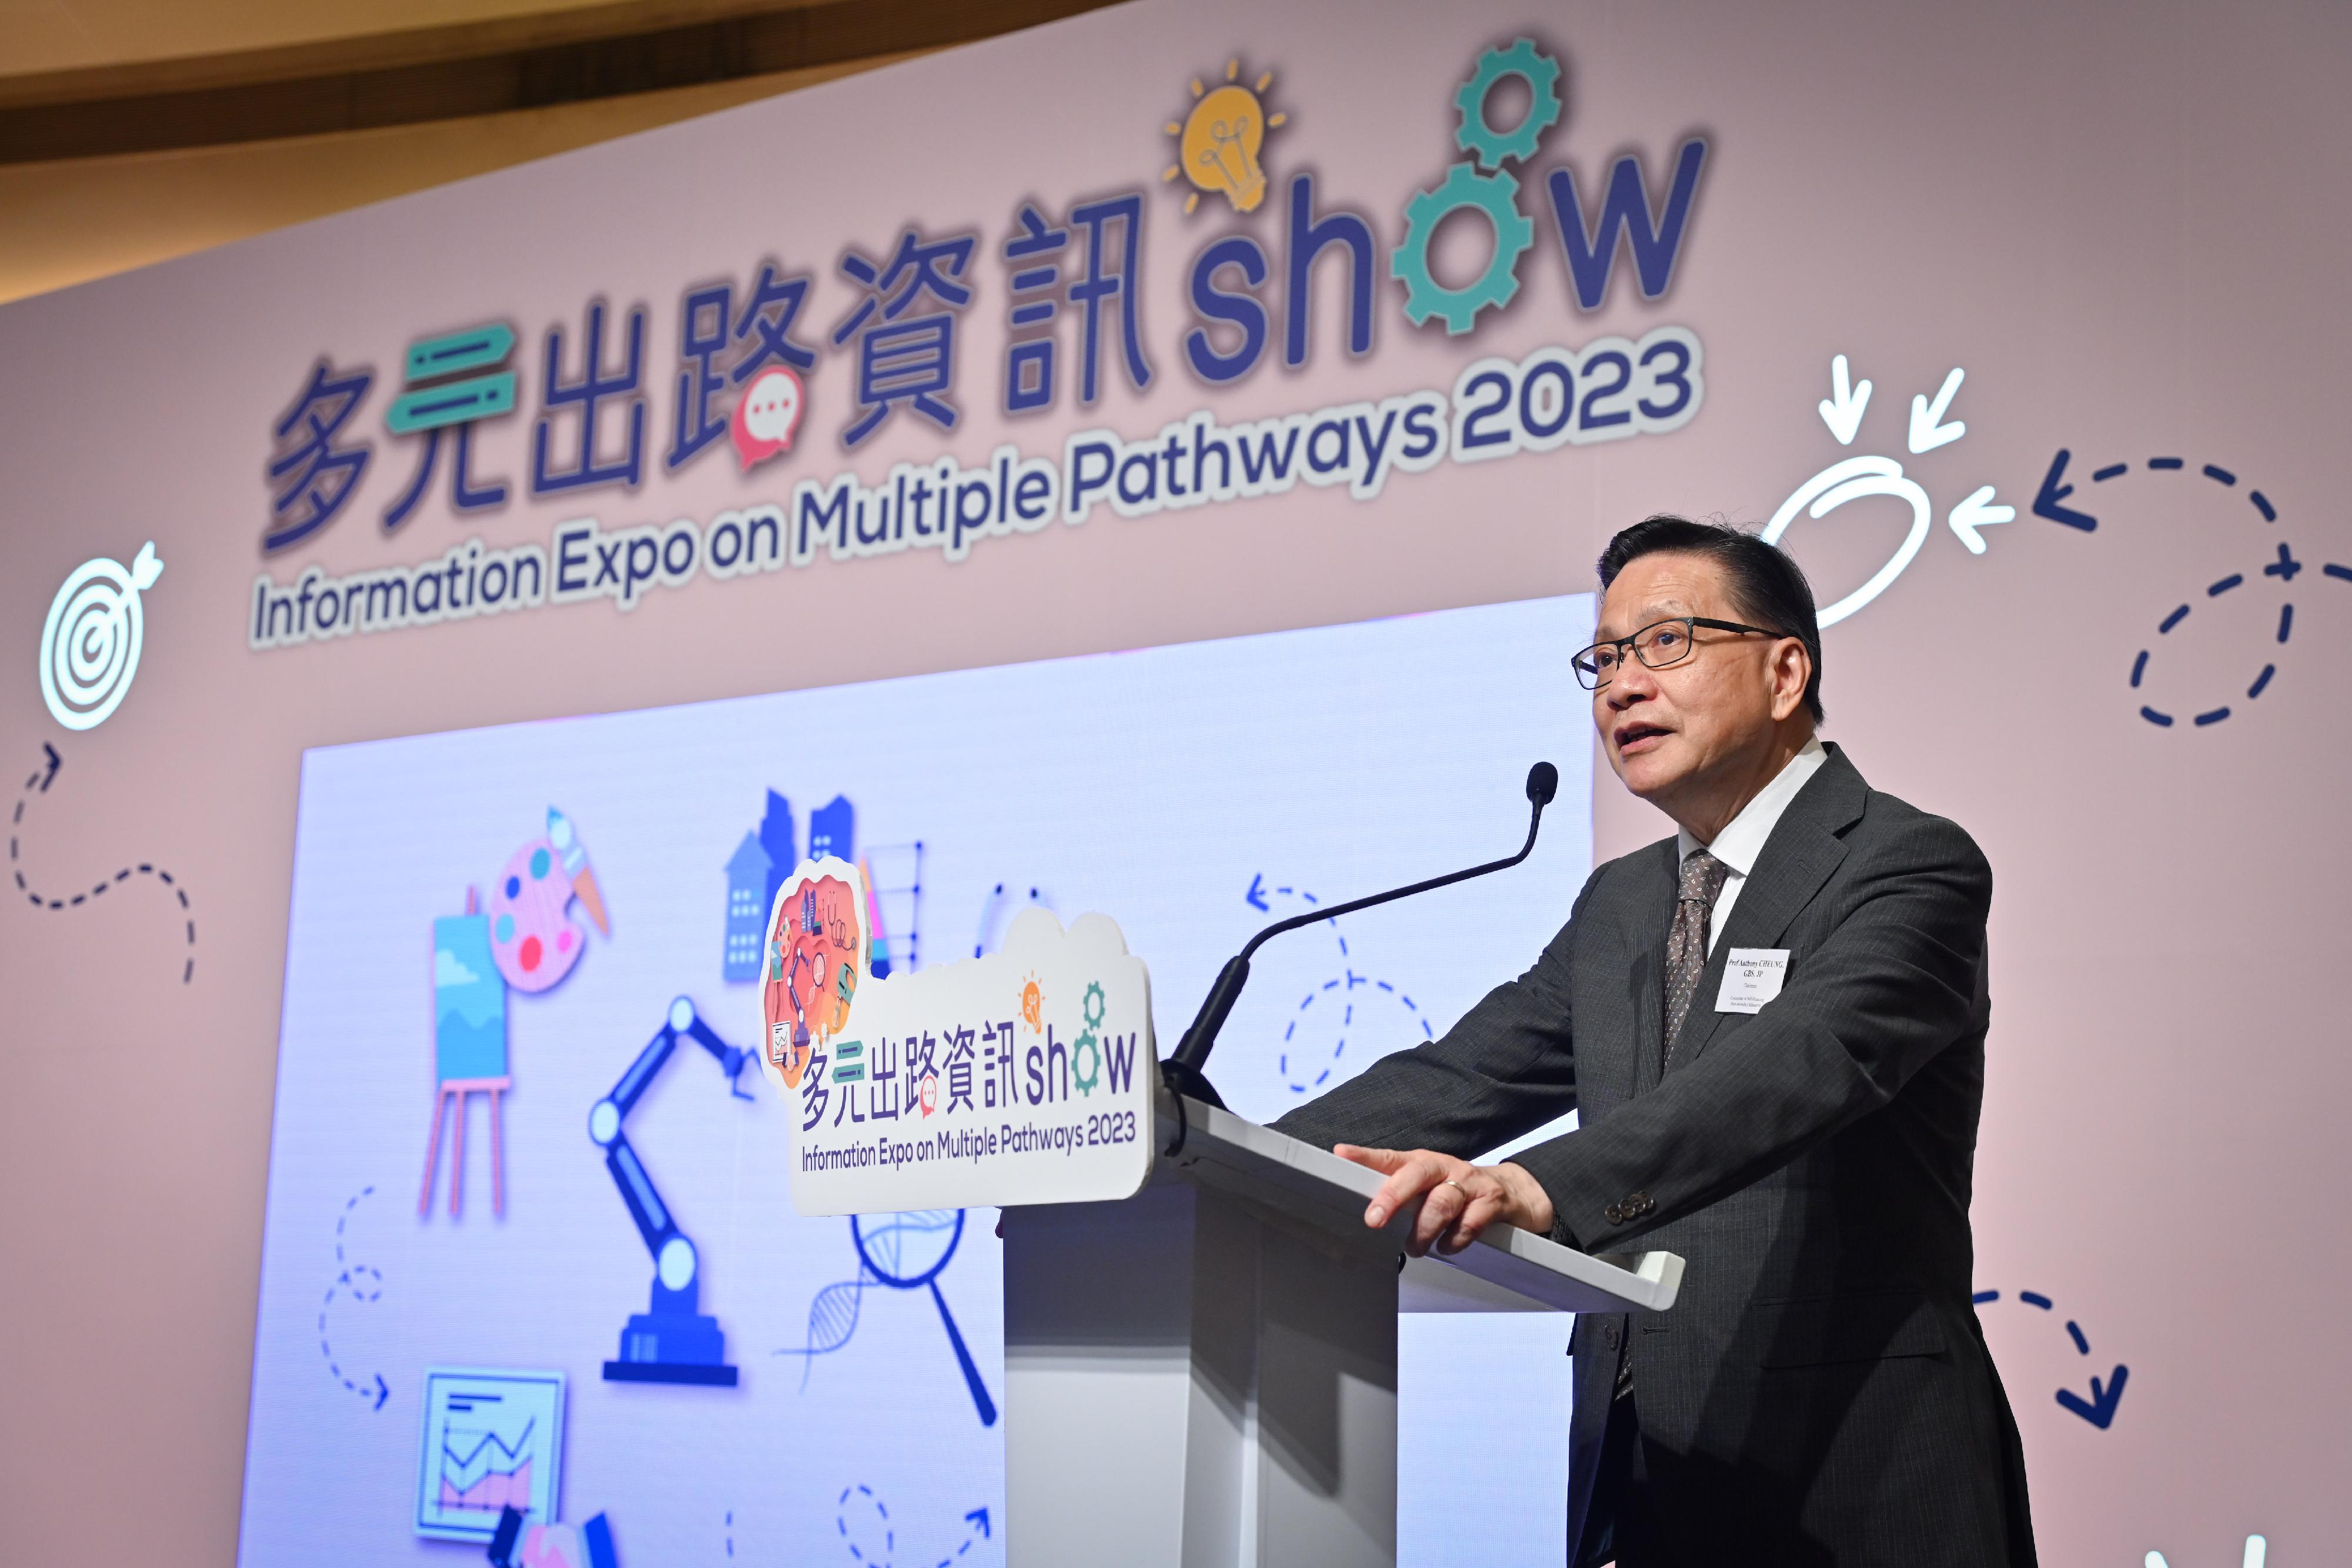 The Chairman of the Committee on Self-financing Post-secondary Education, Professor Anthony Cheung, today (May 19) delivered a speech at the opening ceremony of the Information Expo on Multiple Pathways 2023.